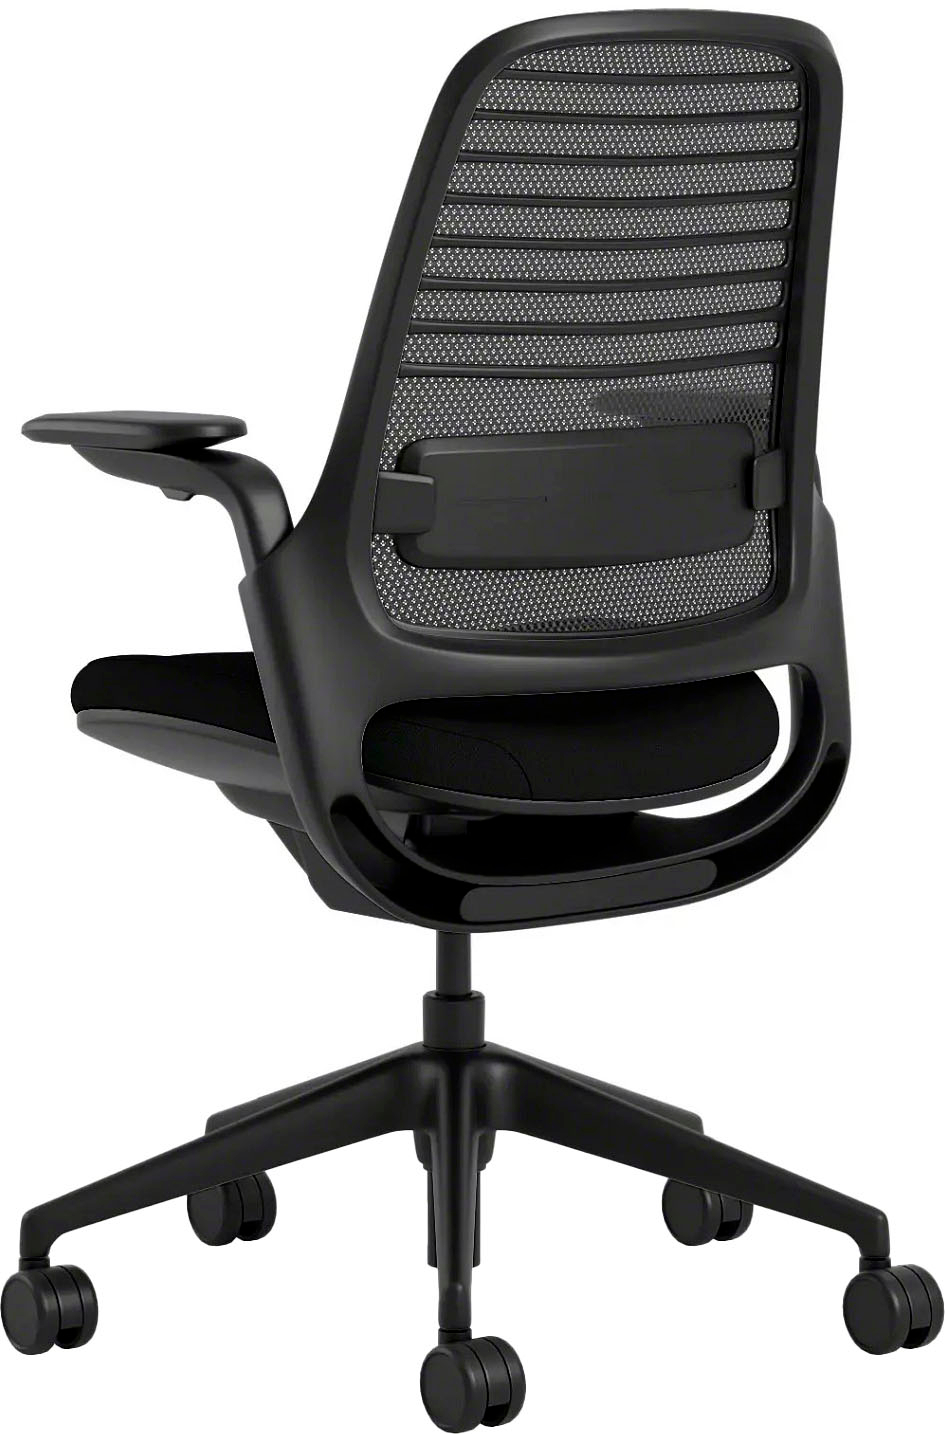 Angle View: Steelcase - Series 1 Chair with Black Frame - Onyx